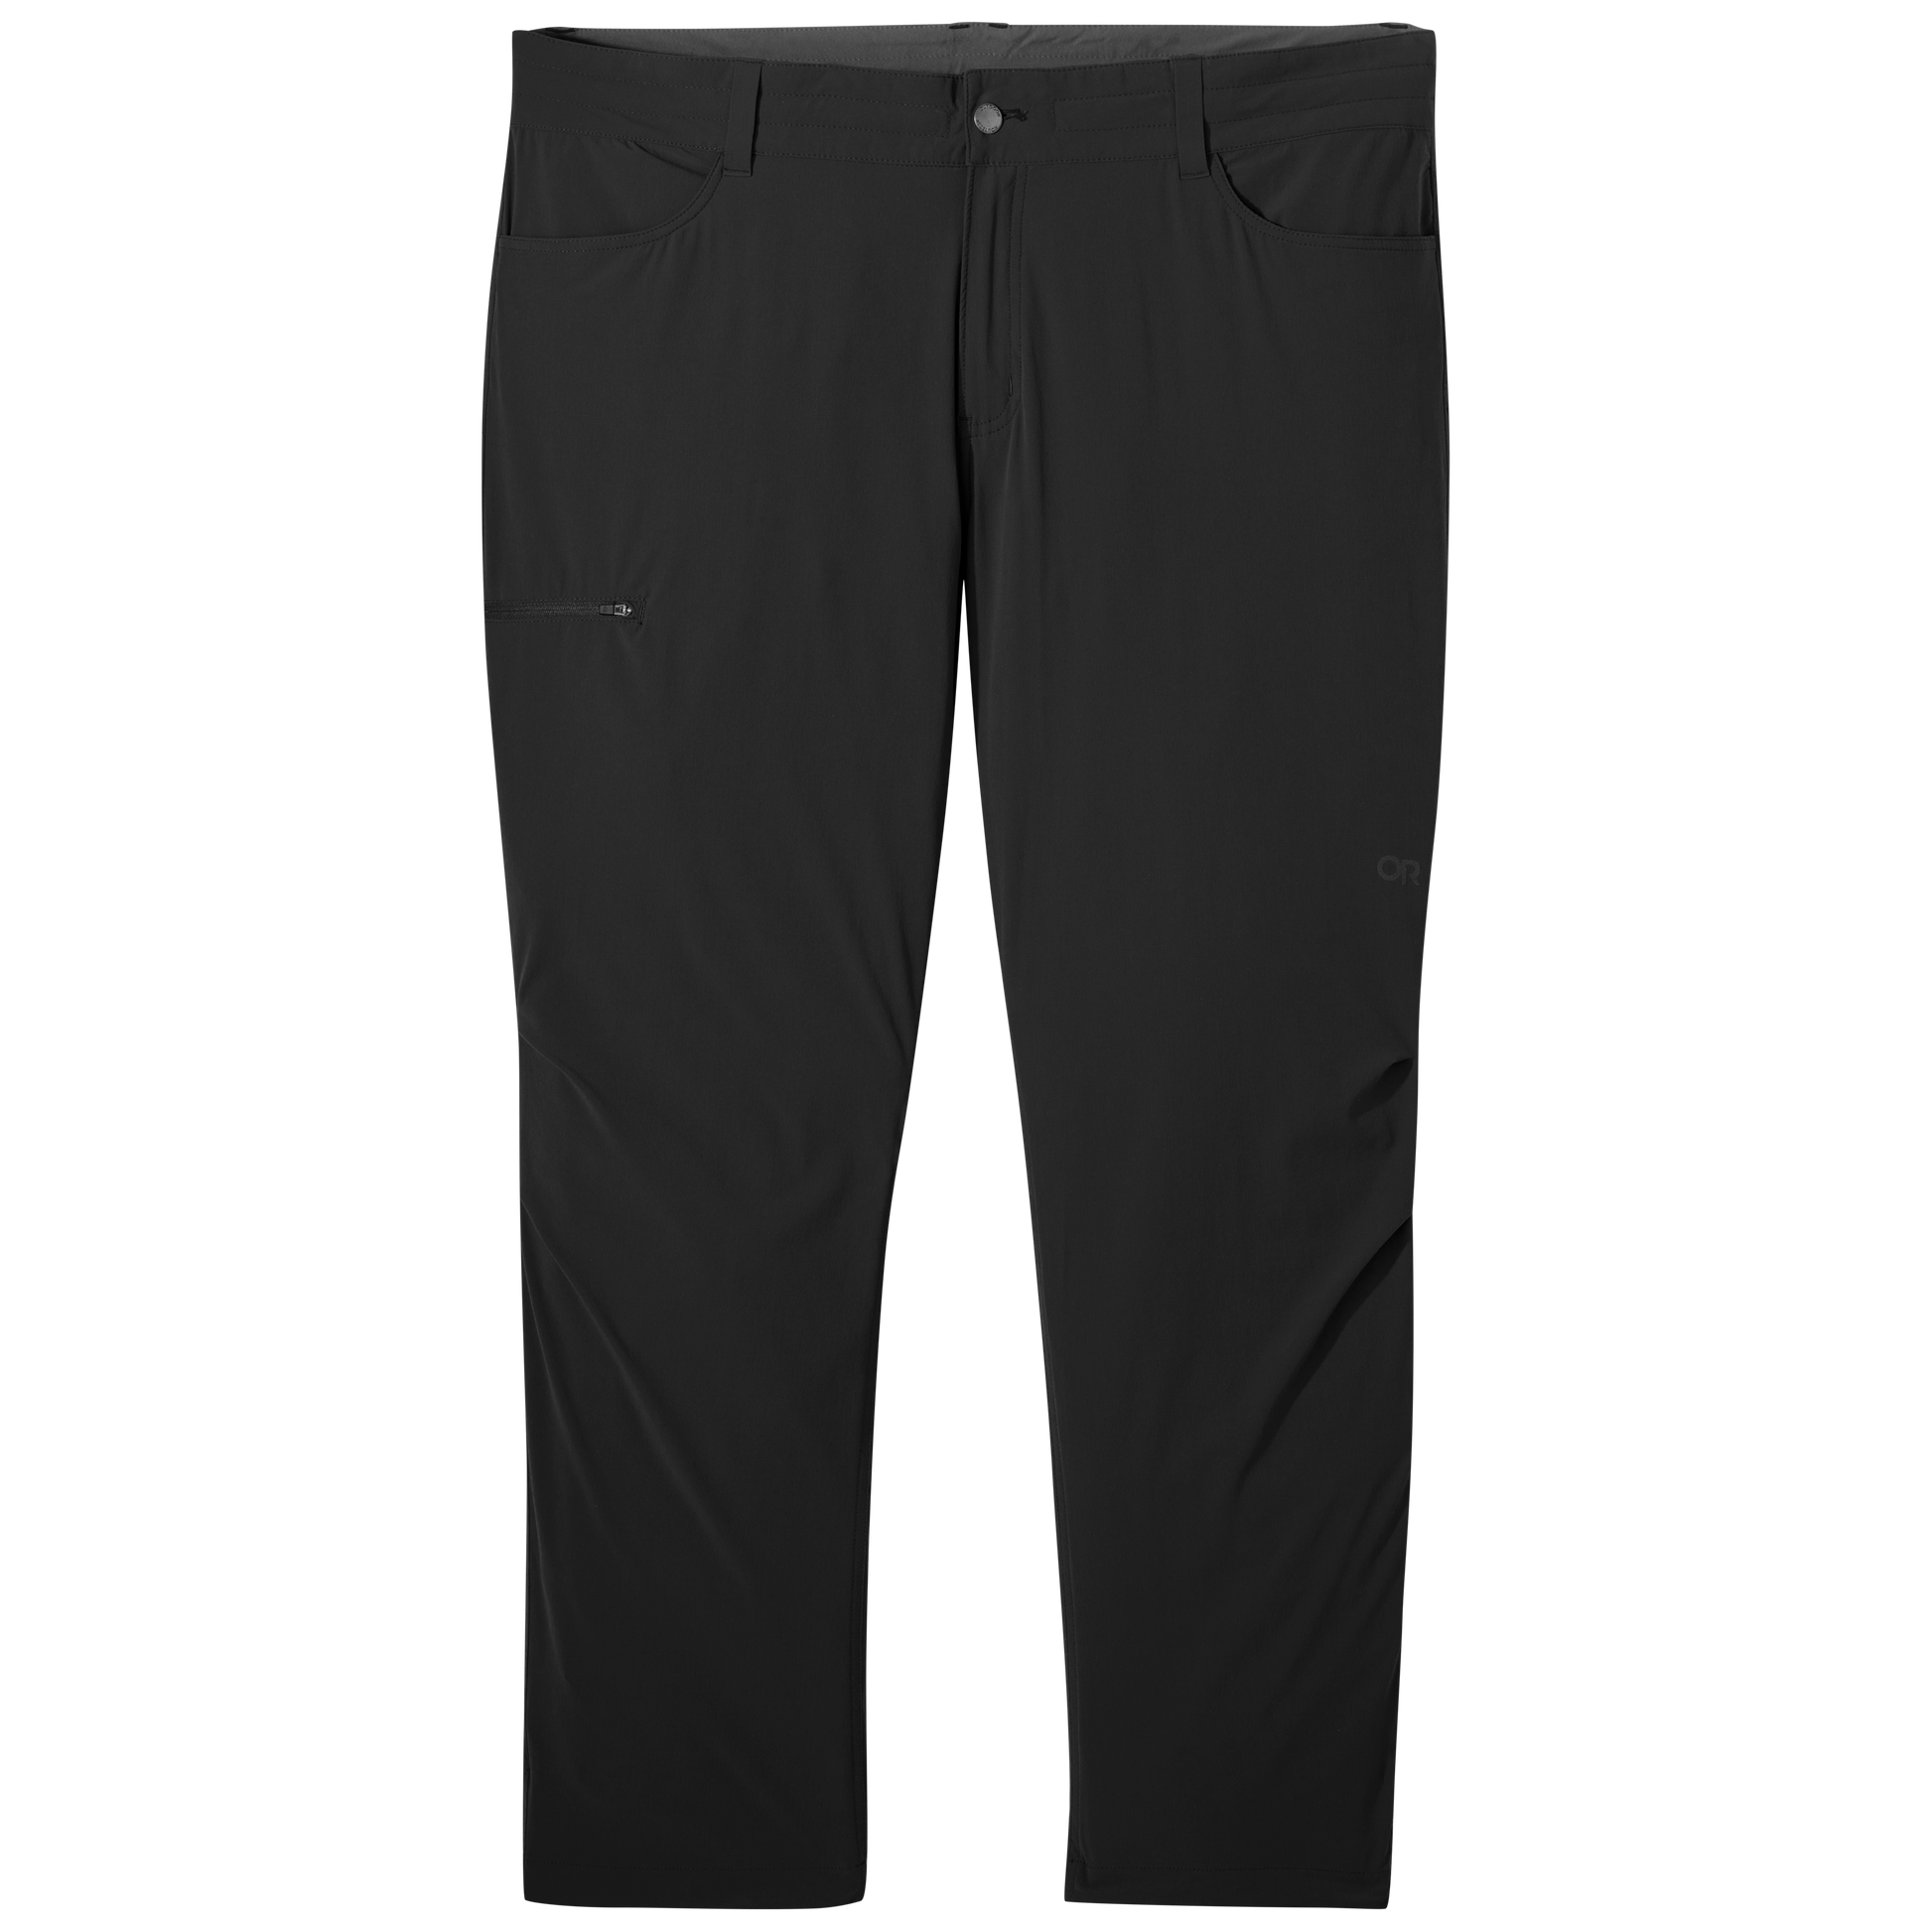 Outdoor Research Ferrosi Transit Pants - Women's, Black — Womens Clothing  Size: Medium, Gender: Female, Age Group: Adults, Apparel Application:  Outdoor — 3002710001007 - 1 out of 12 models